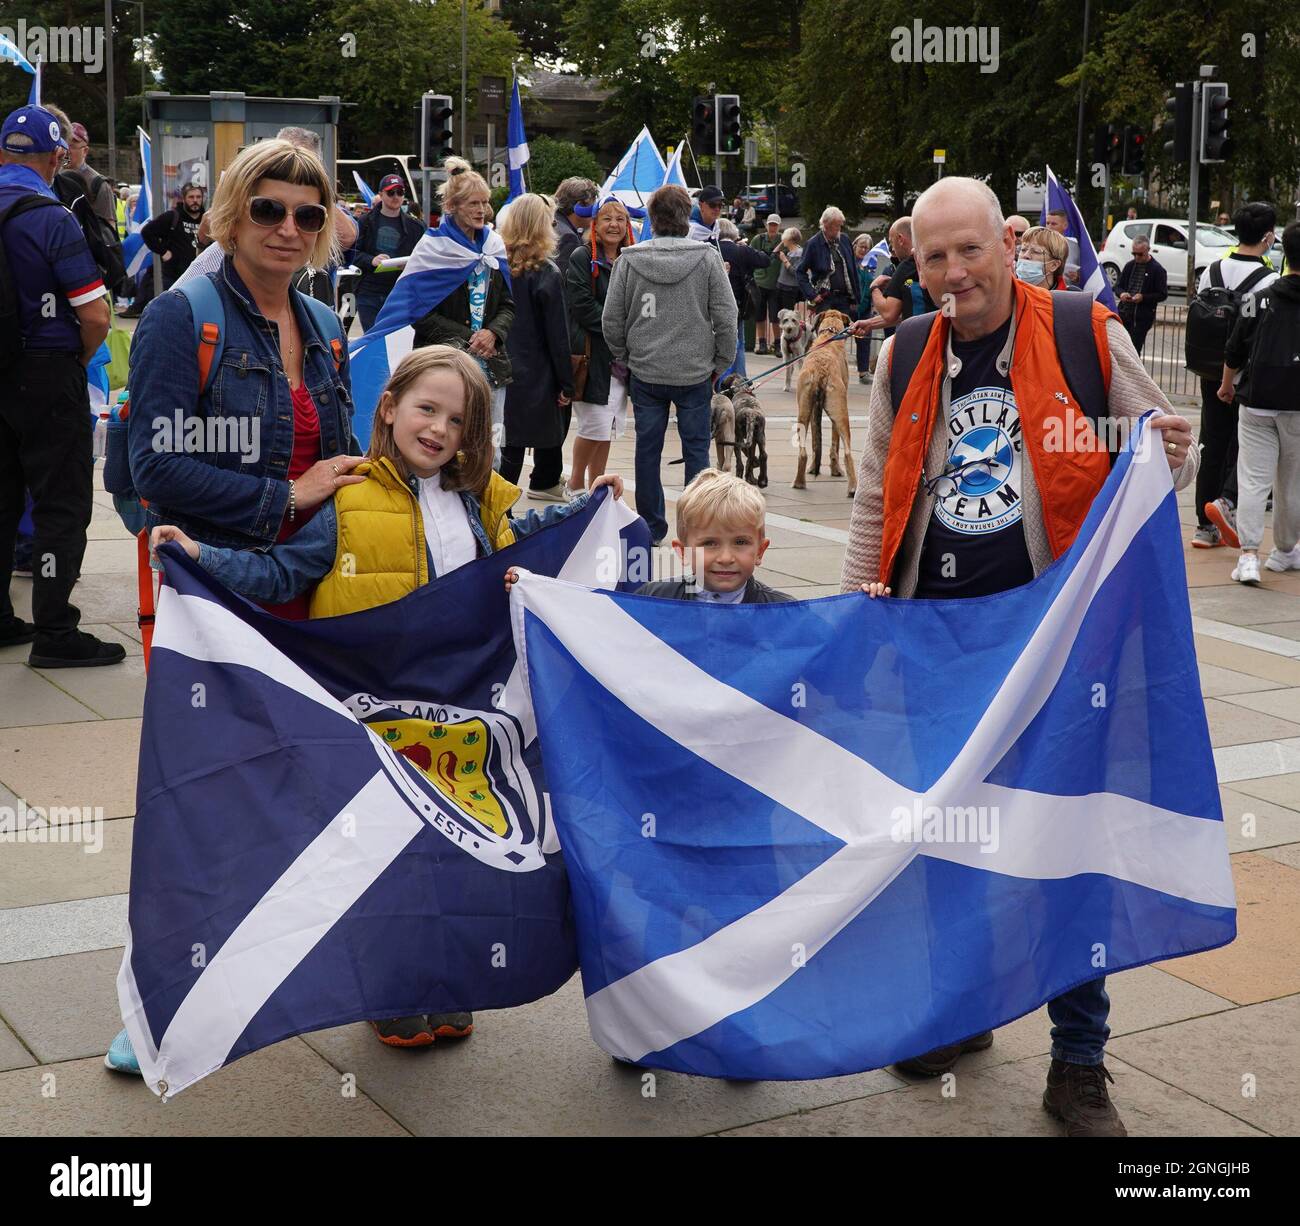 Scottish Parliament, Holyrood, Edinburgh, Scotland, 25th of Sep 2021: 5000’s independence supporters marched on Holyrood the Scottish Parliament, demanding the Scottish government take action and move forward with a second independence referendum. This march was organised by the group - All Under One Banner. A rally was held once at the Scottish parliament which seen many speakers, including Alba MP Neale Hanvey and SNP MP Douglas Chapman. Credit: Stable Air Media/Alamy Live News Stock Photo